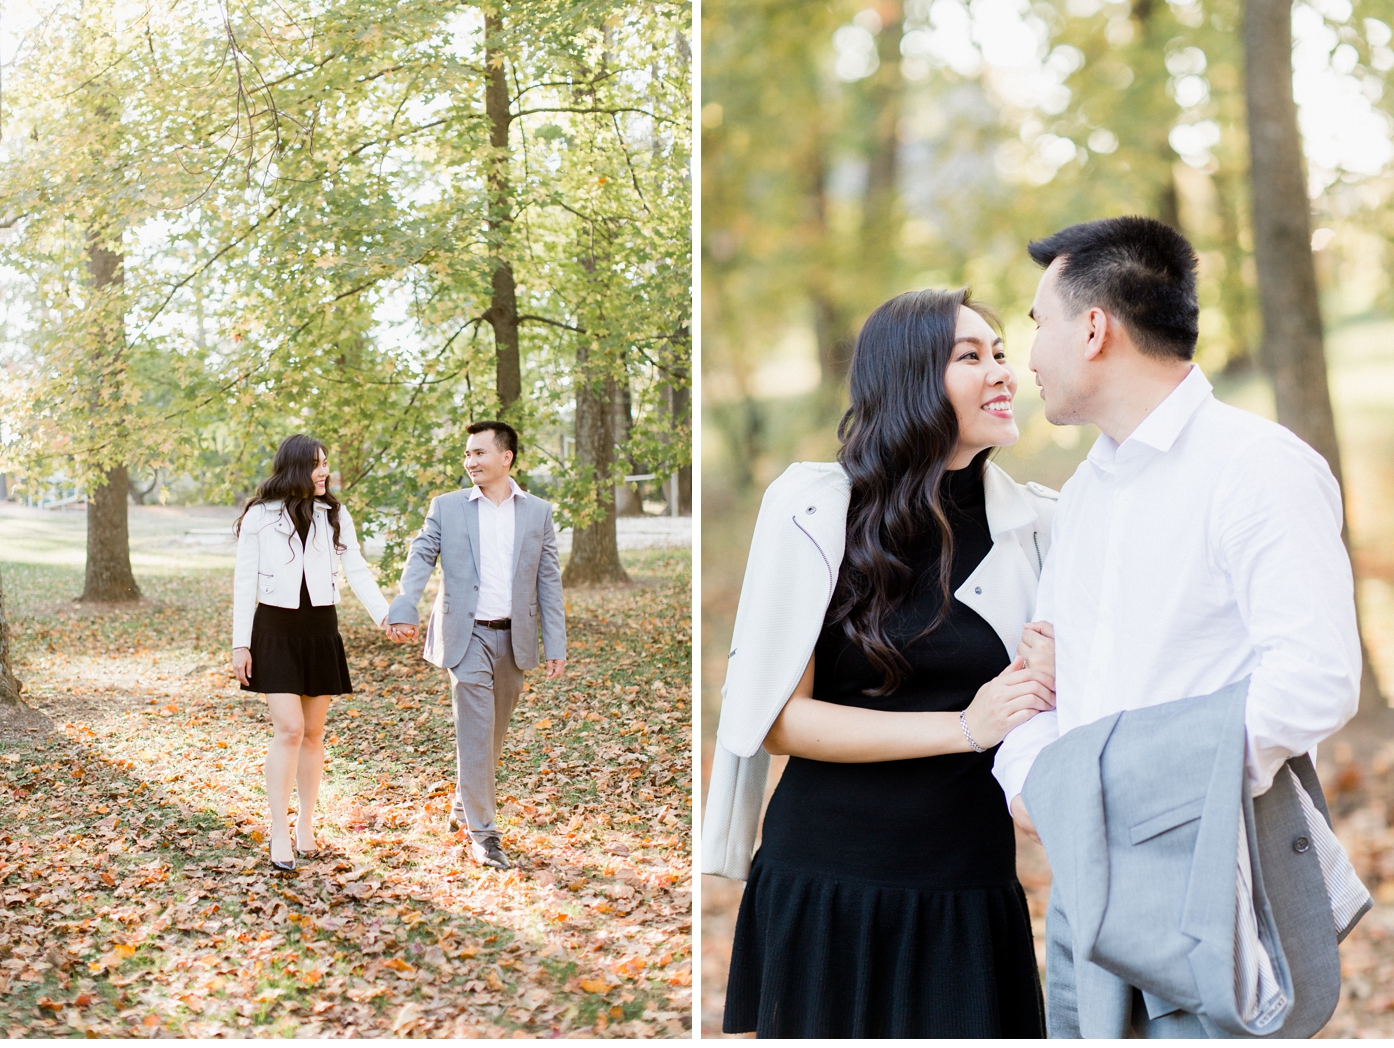 Cherry Hill Farmhouse Engagement Session in Falls Church Virginia by Alisandra Photography